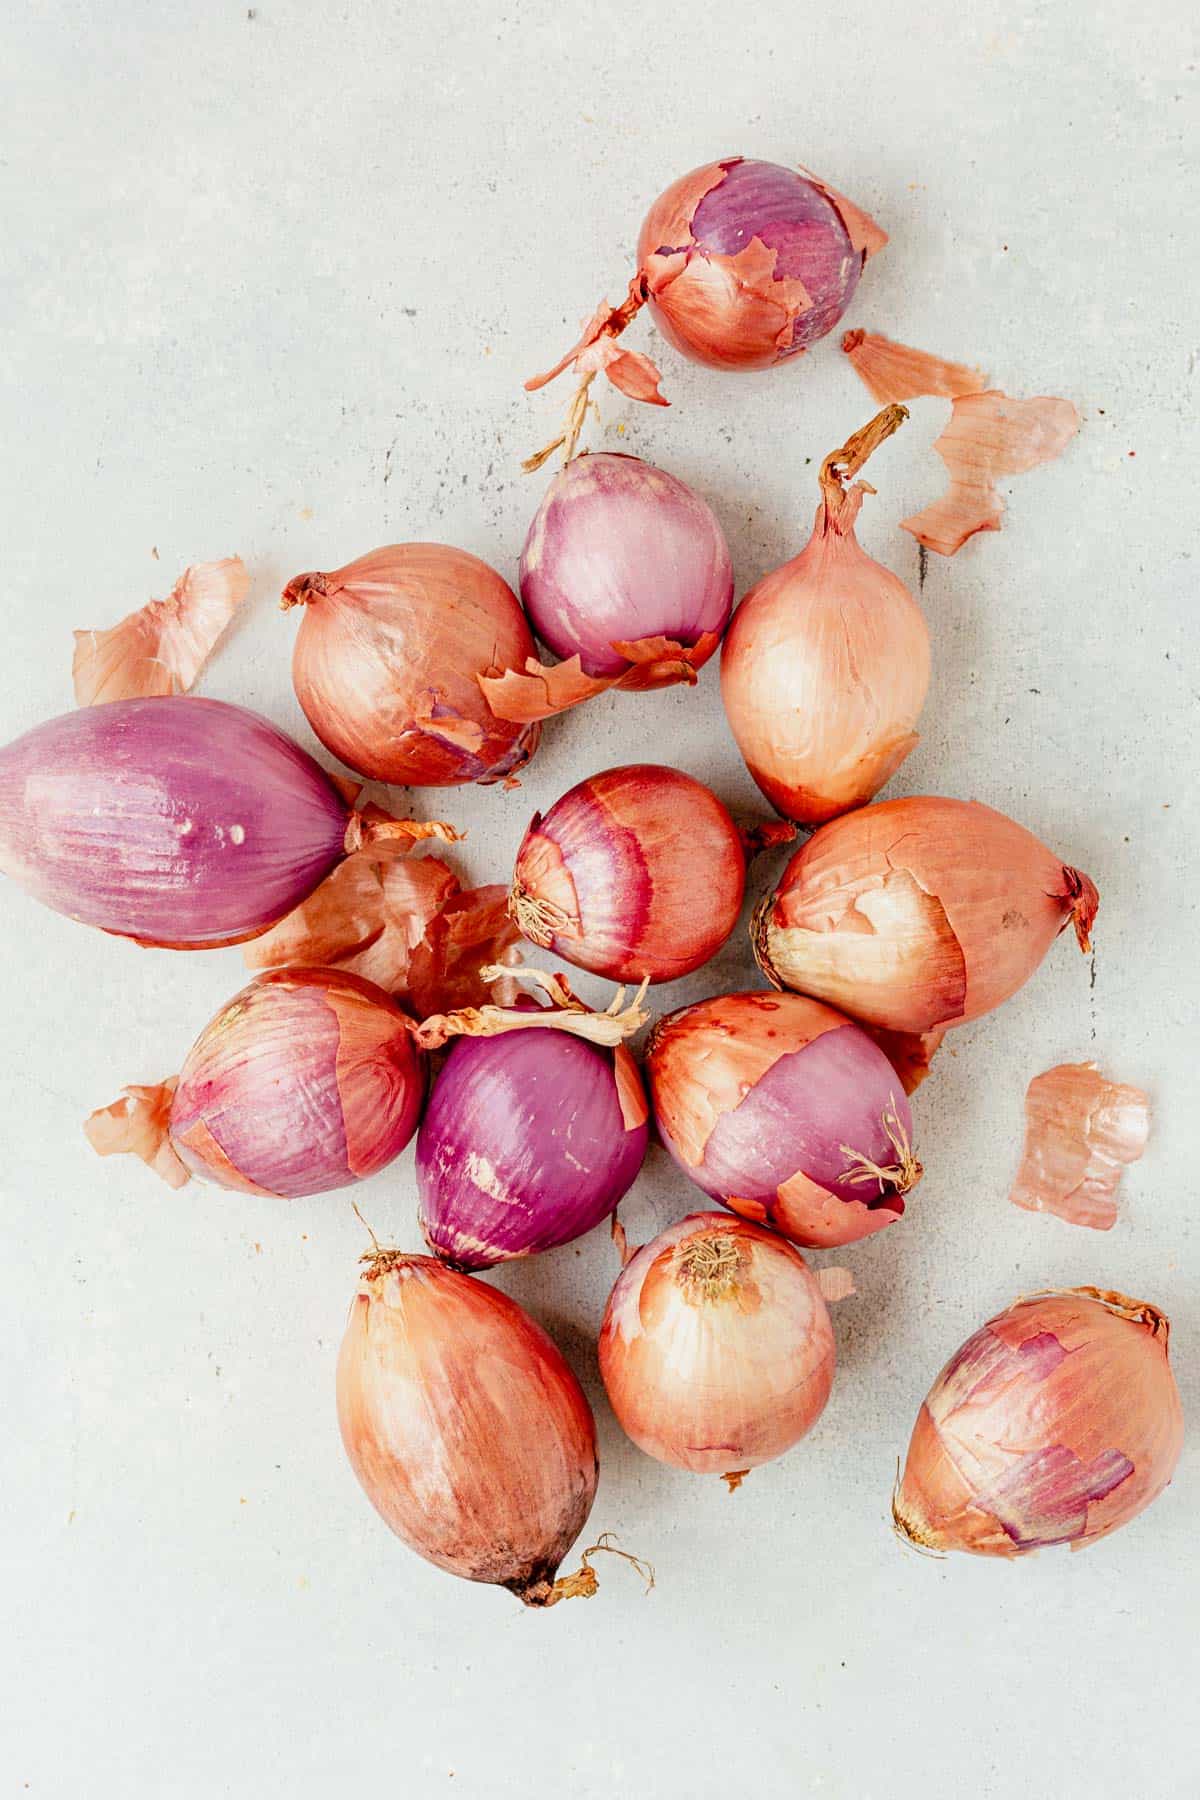 10 whole shallots laying on a countertop